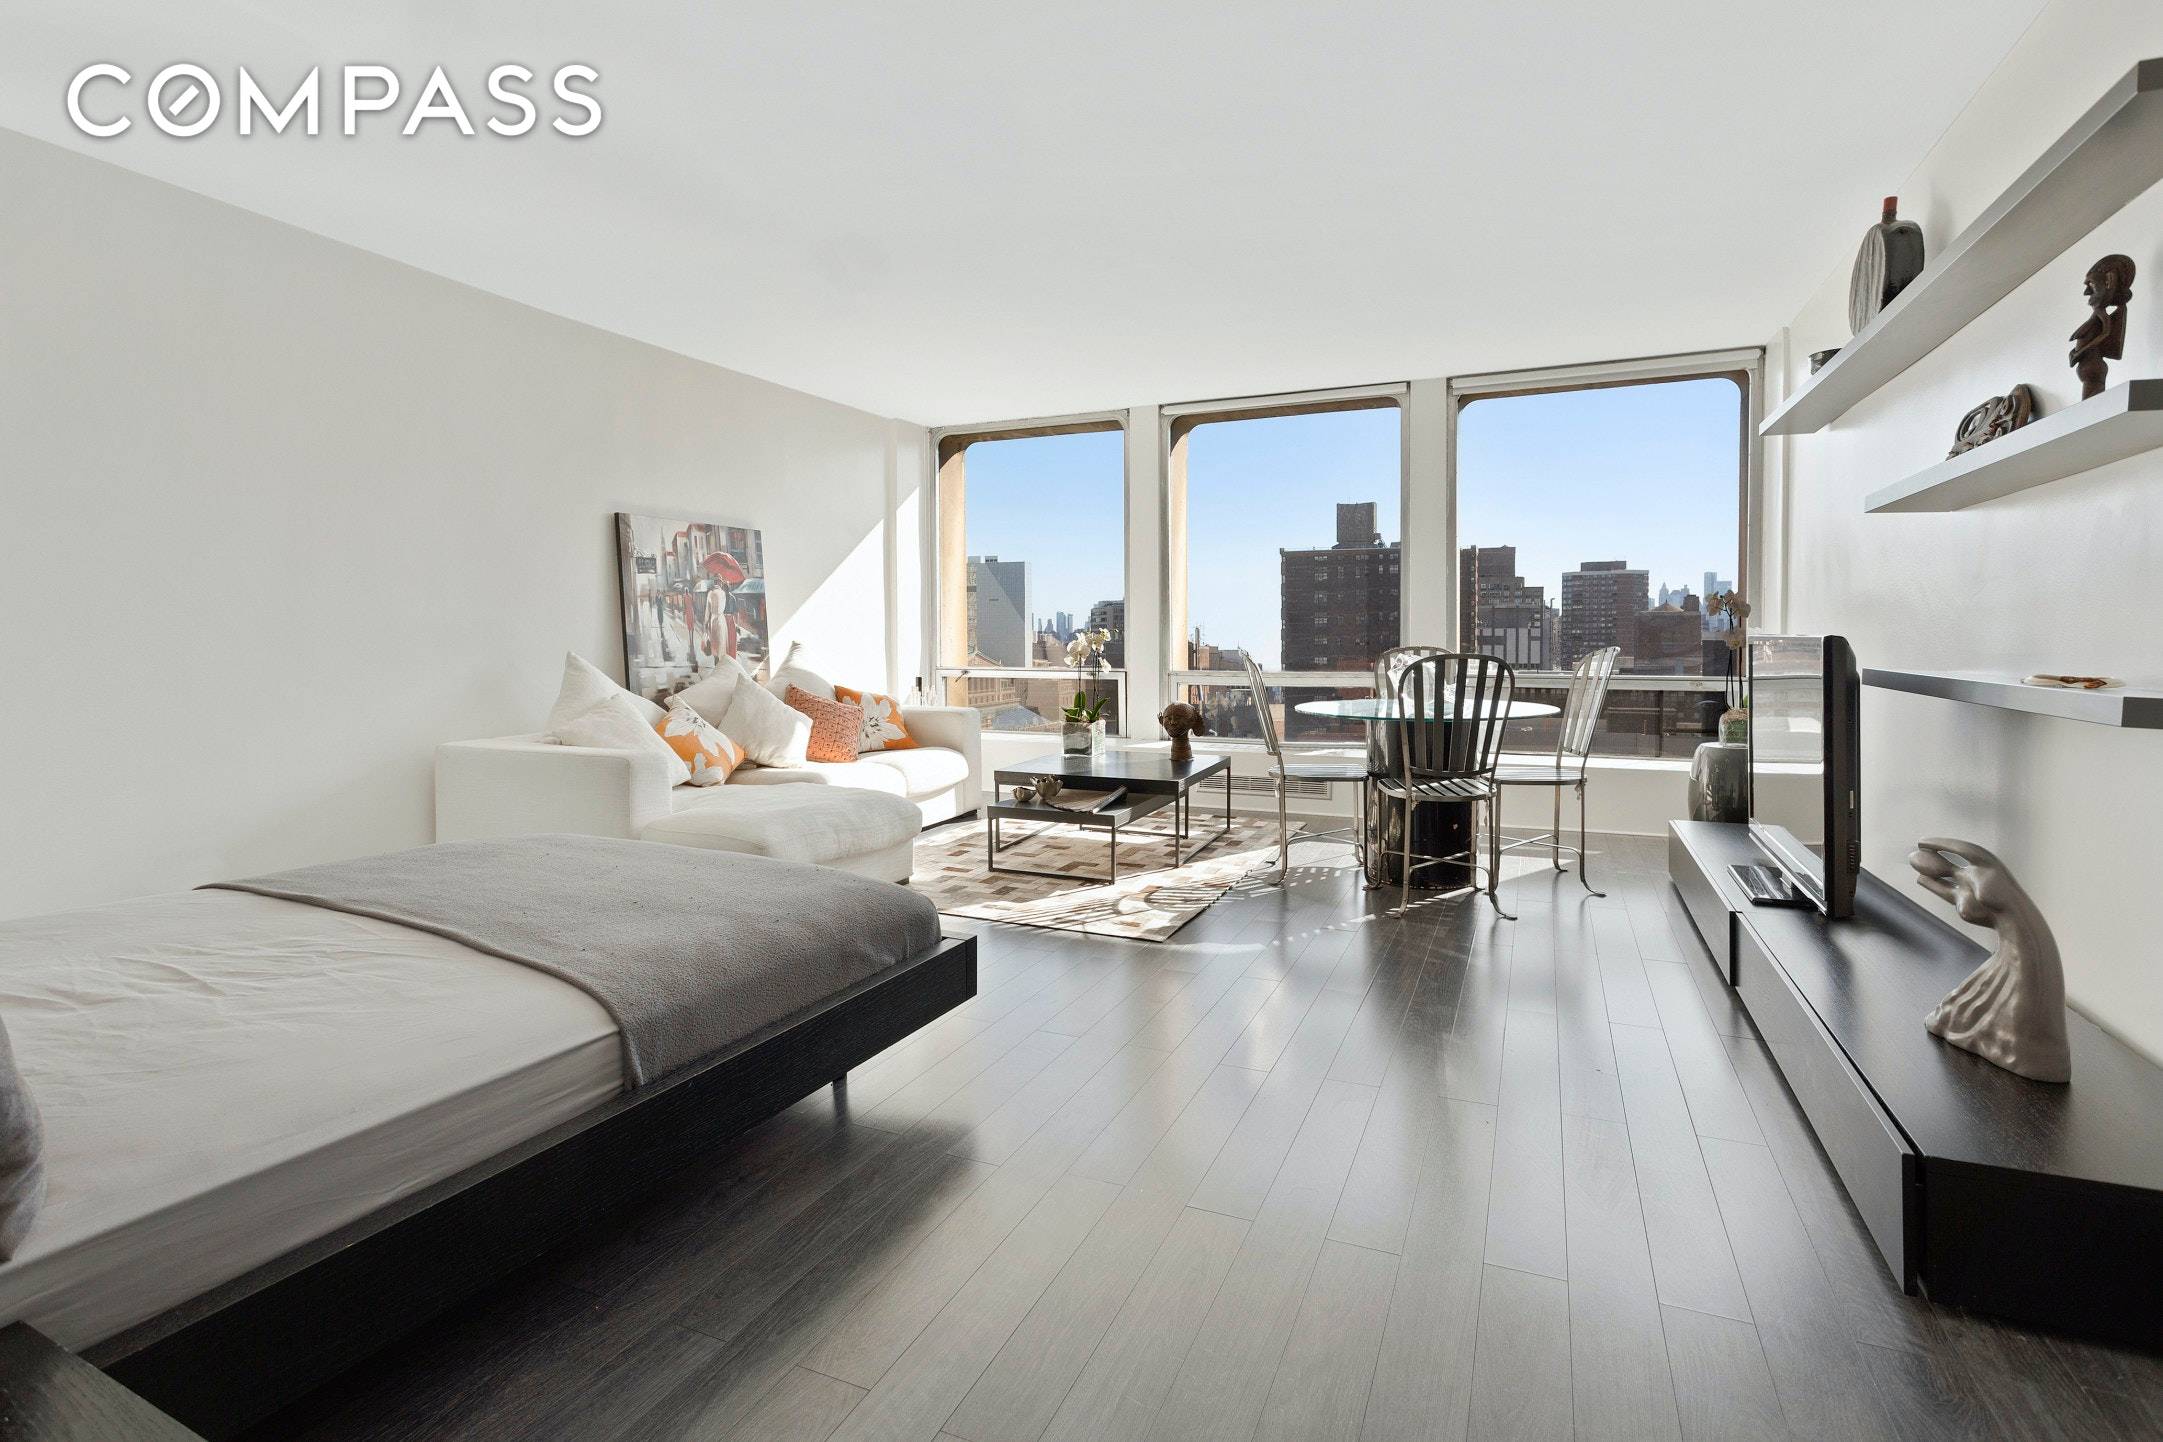 New to the Market ! Rare opportunity to purchase this D line studio at the iconic Kips Bay Towers, designed by famed architect I.